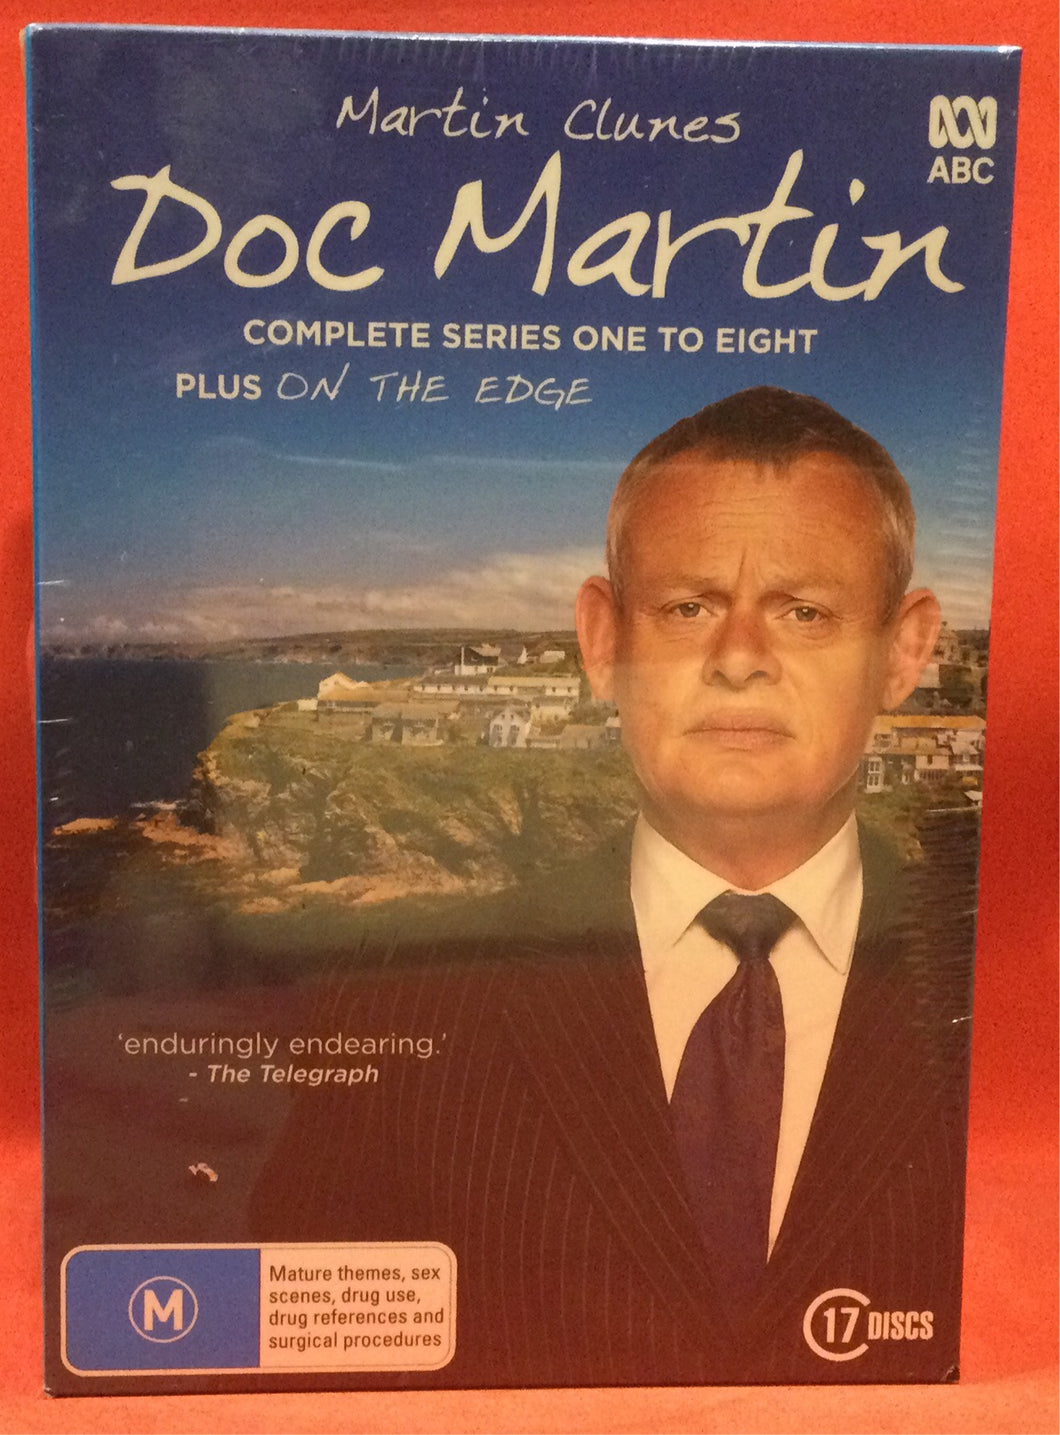 DOC MARTIN - COMPLETE SERIES 1 TO 8 - 17 DVD DISCS (SEALED)